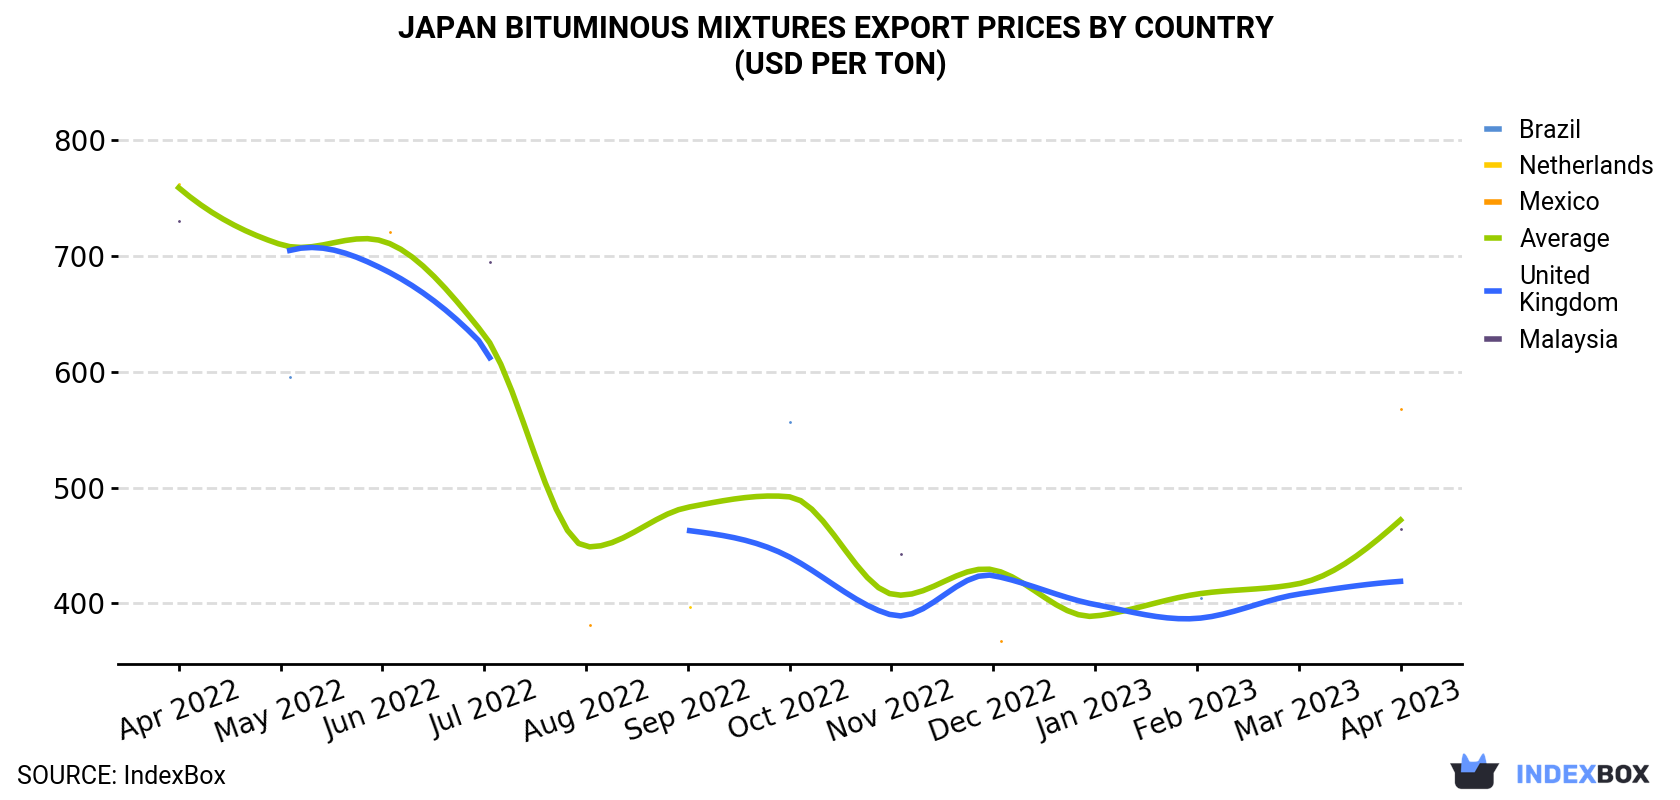 Japan Bituminous Mixtures Export Prices By Country (USD Per Ton)